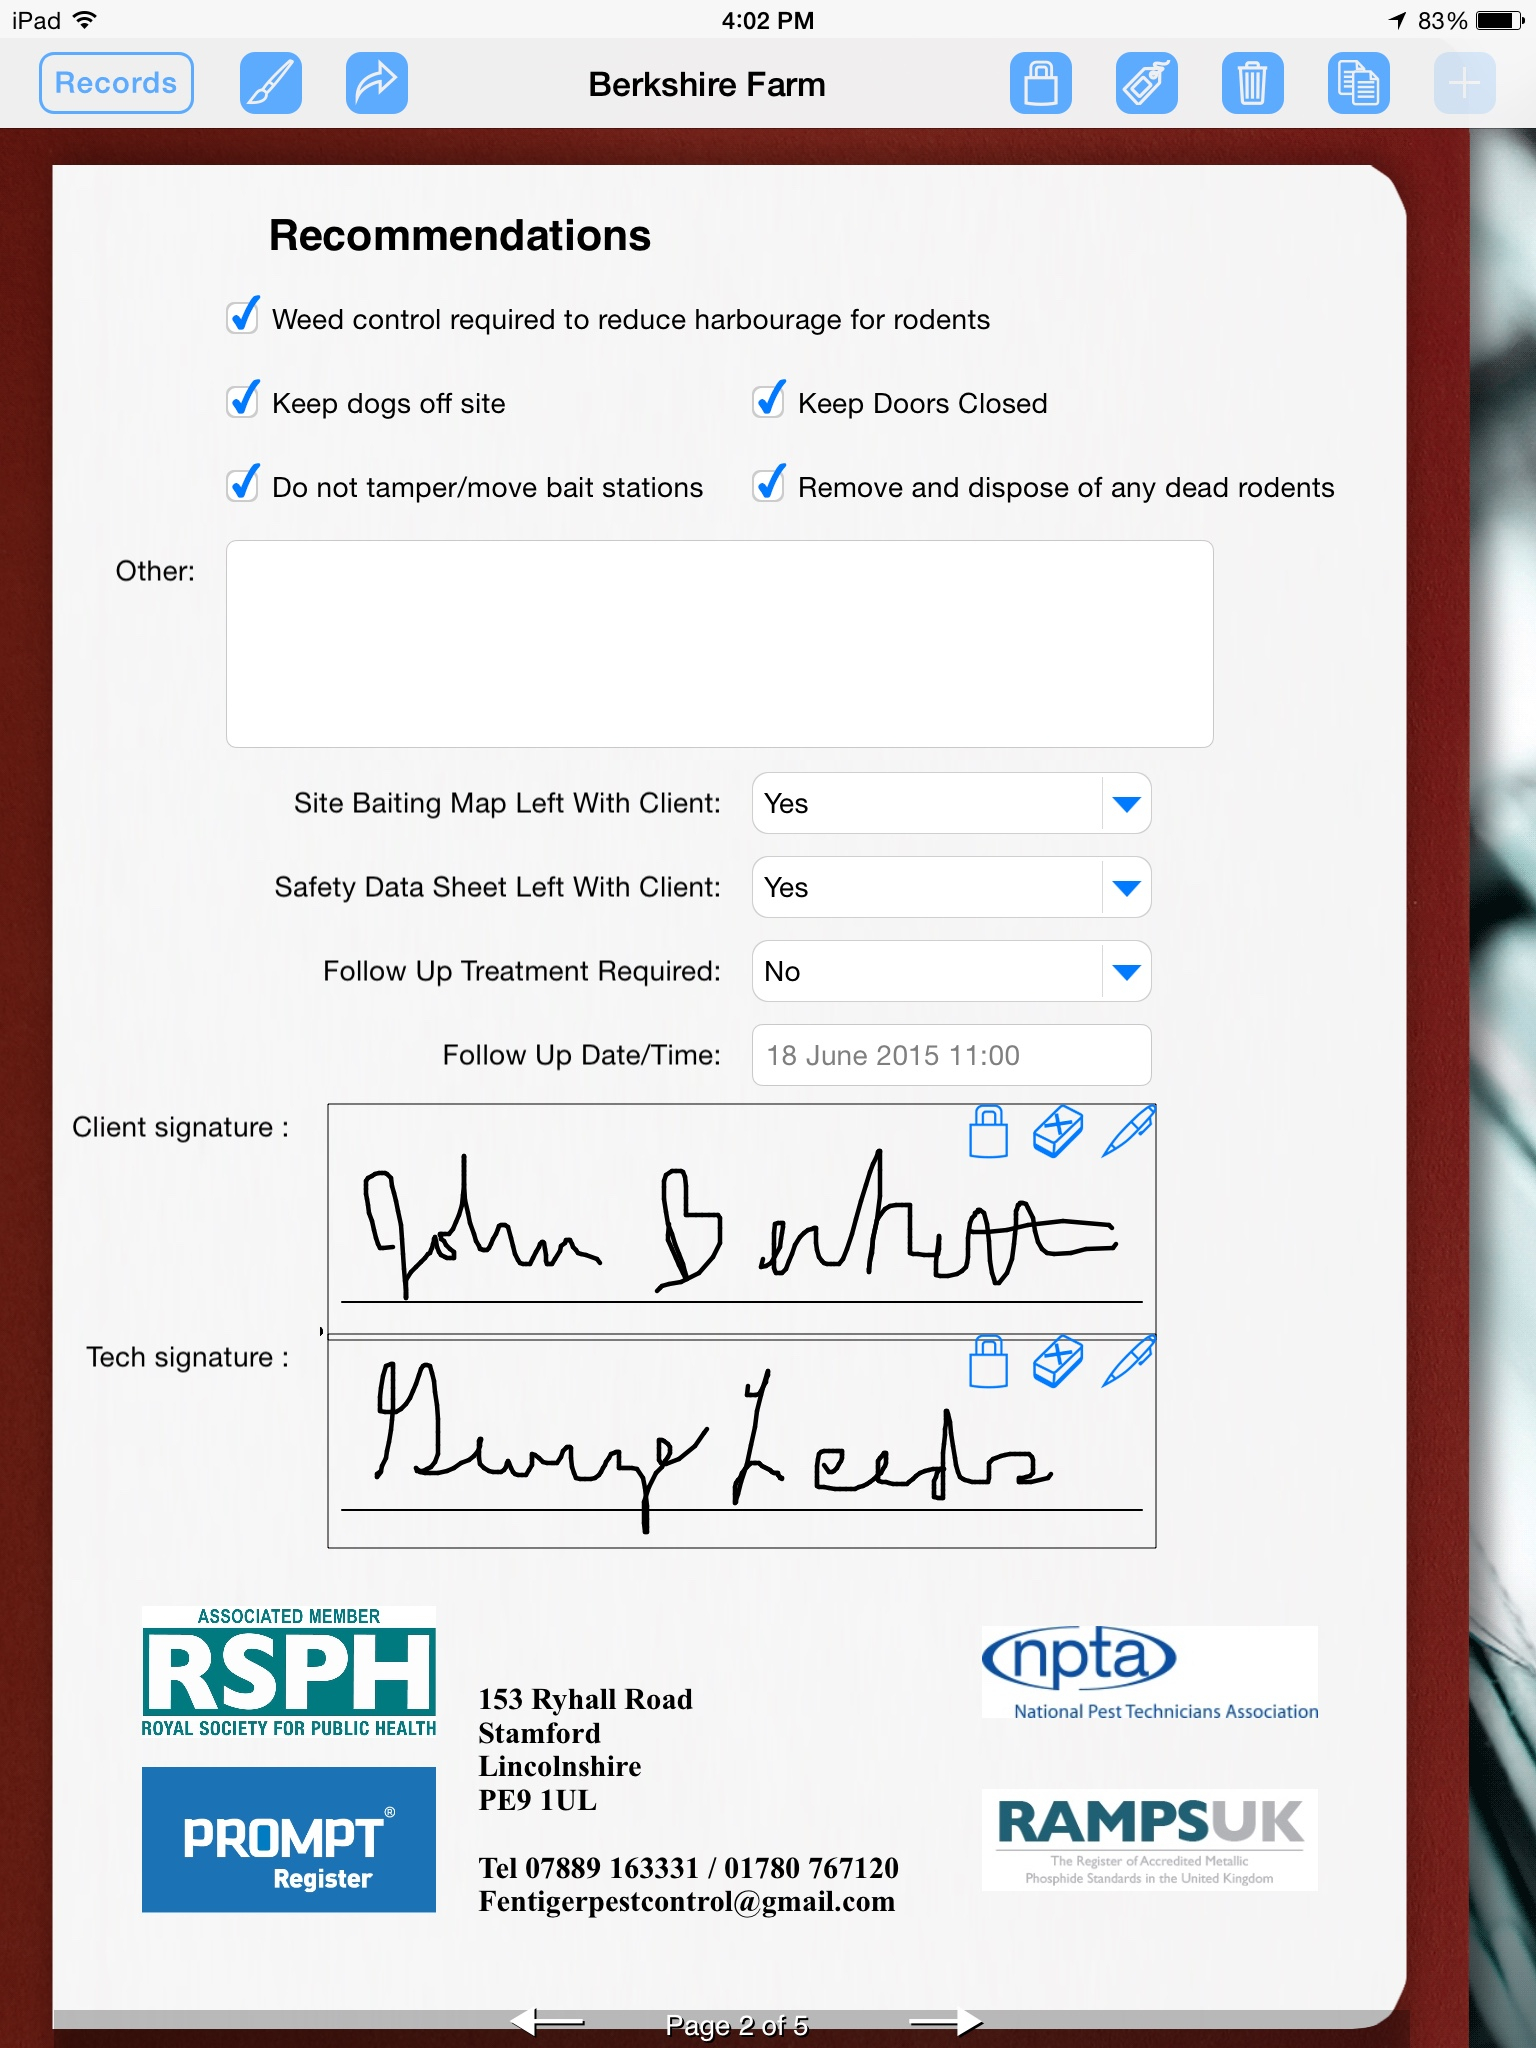 Pest Control Uses Ipad To Prepare Service Report | Form Within Pest Control Inspection Report Template